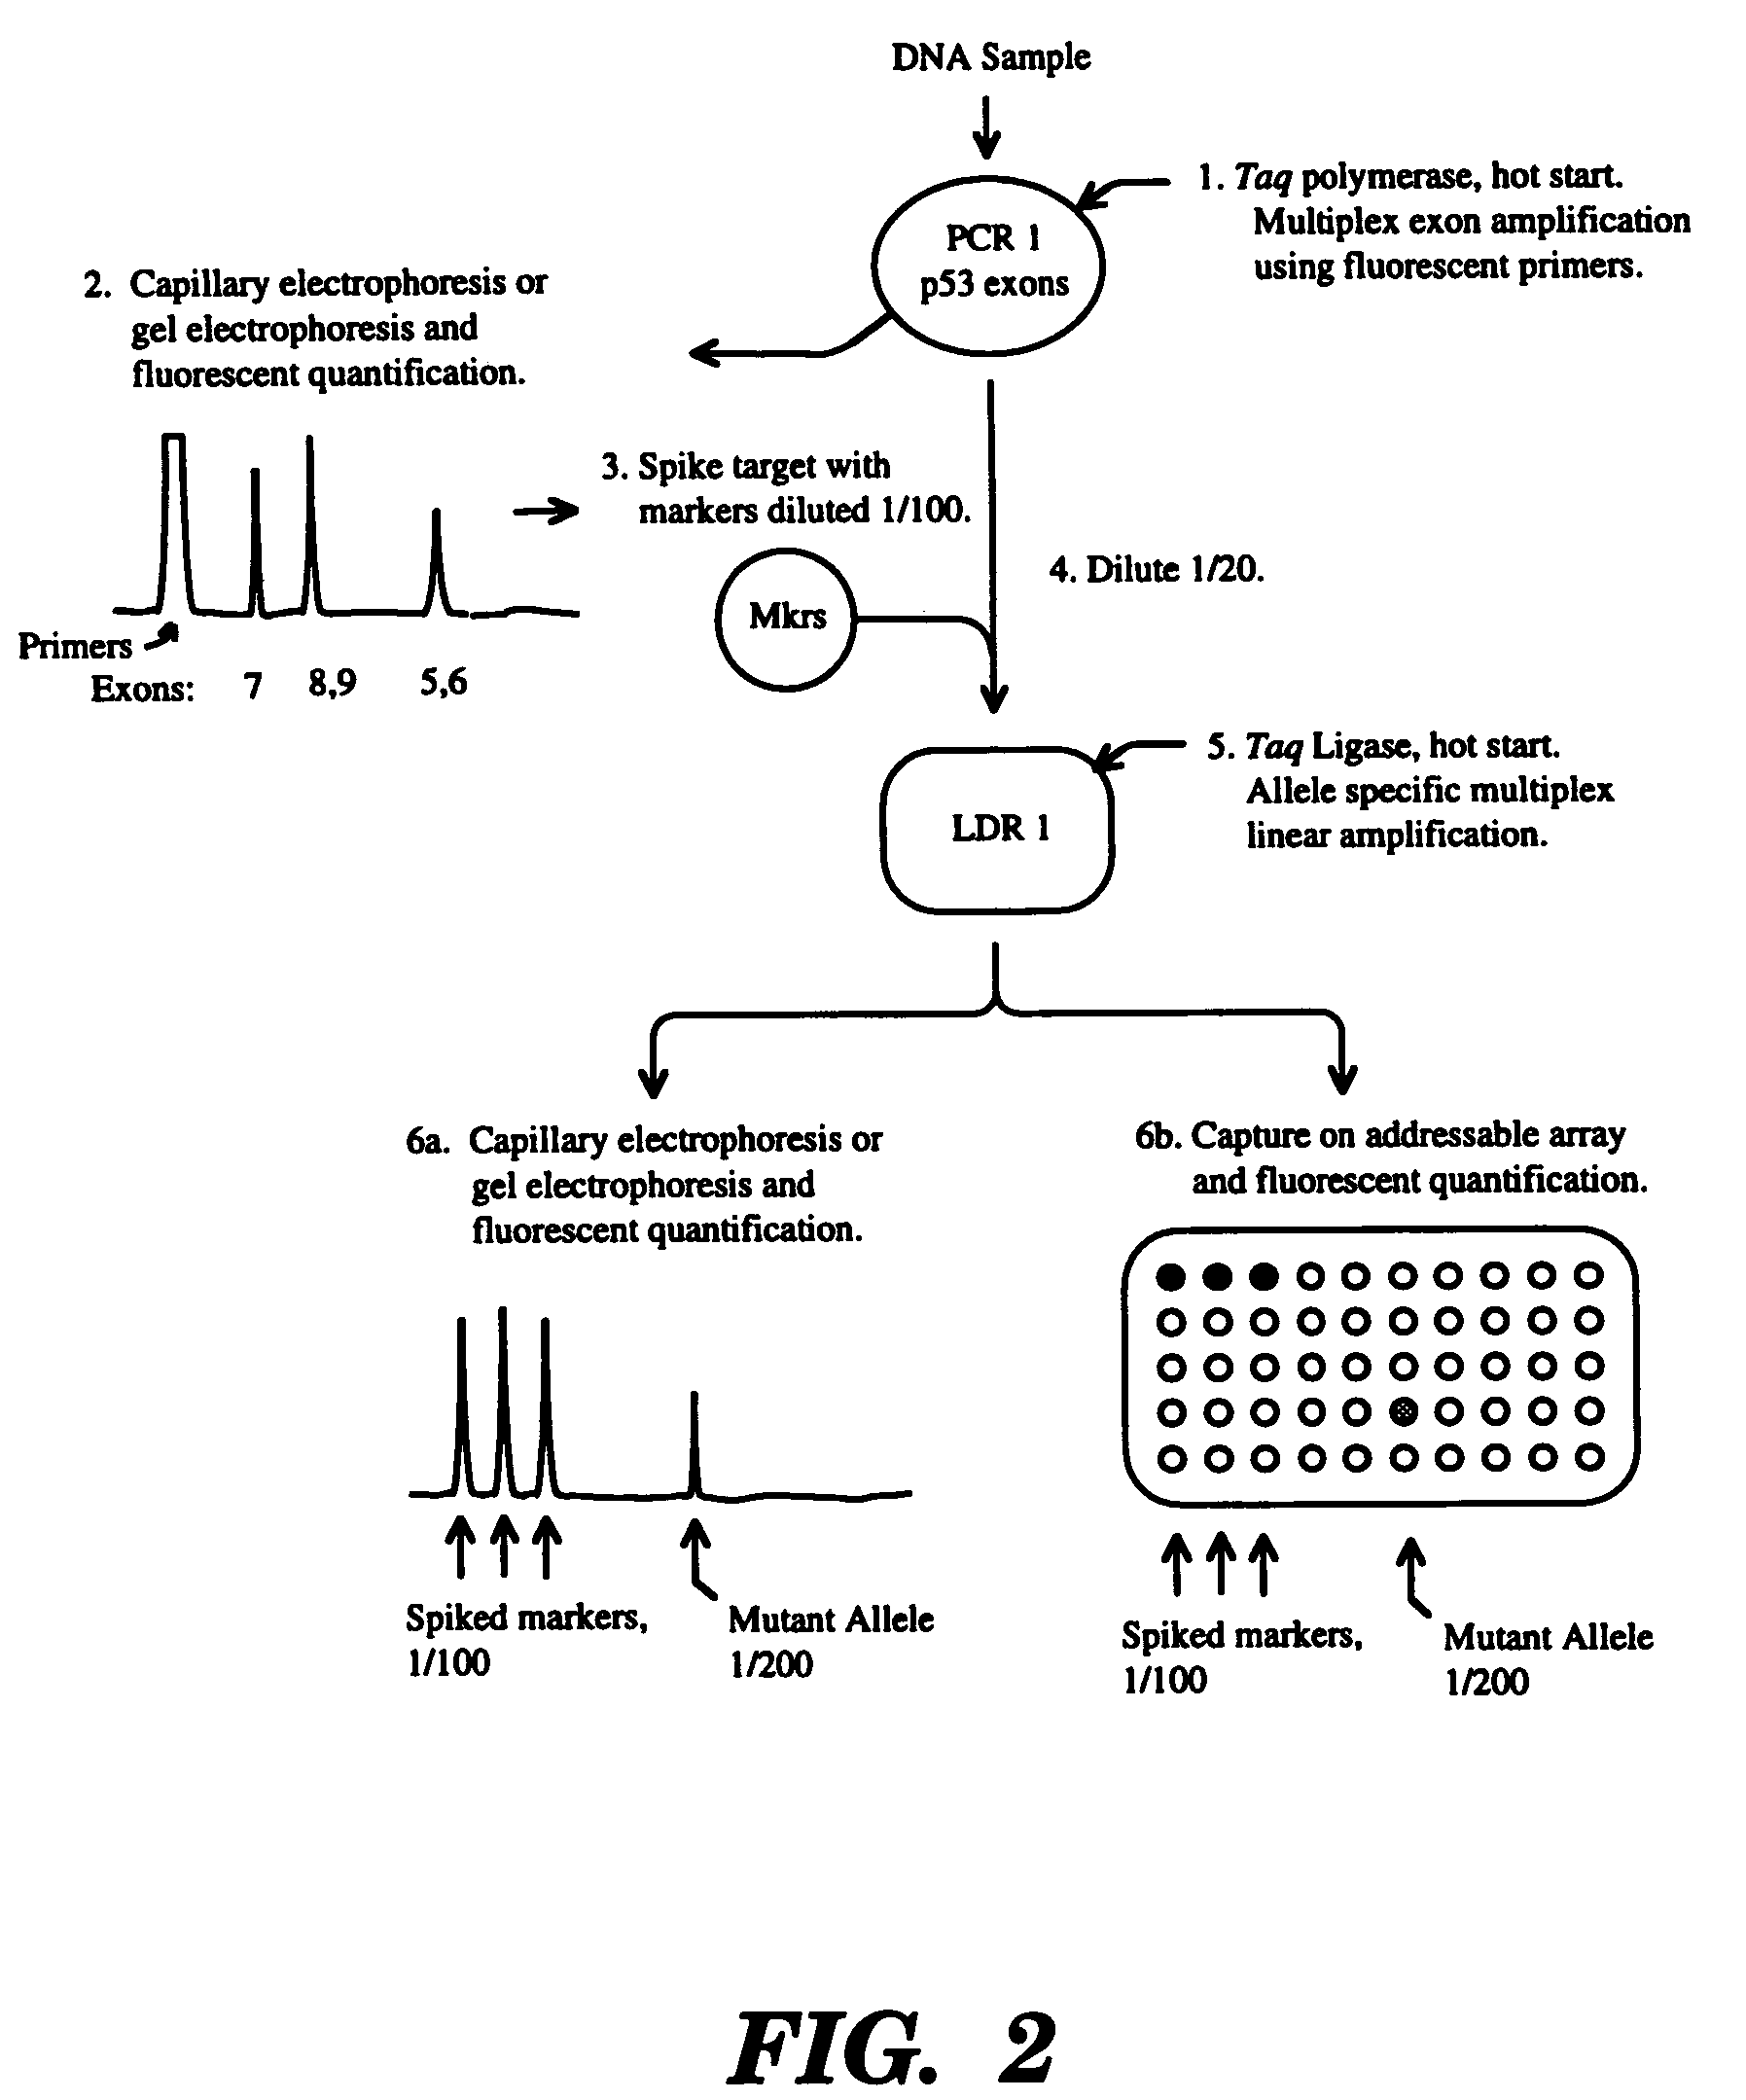 High fidelity detection of nucleic acid differences by ligase detection reaction